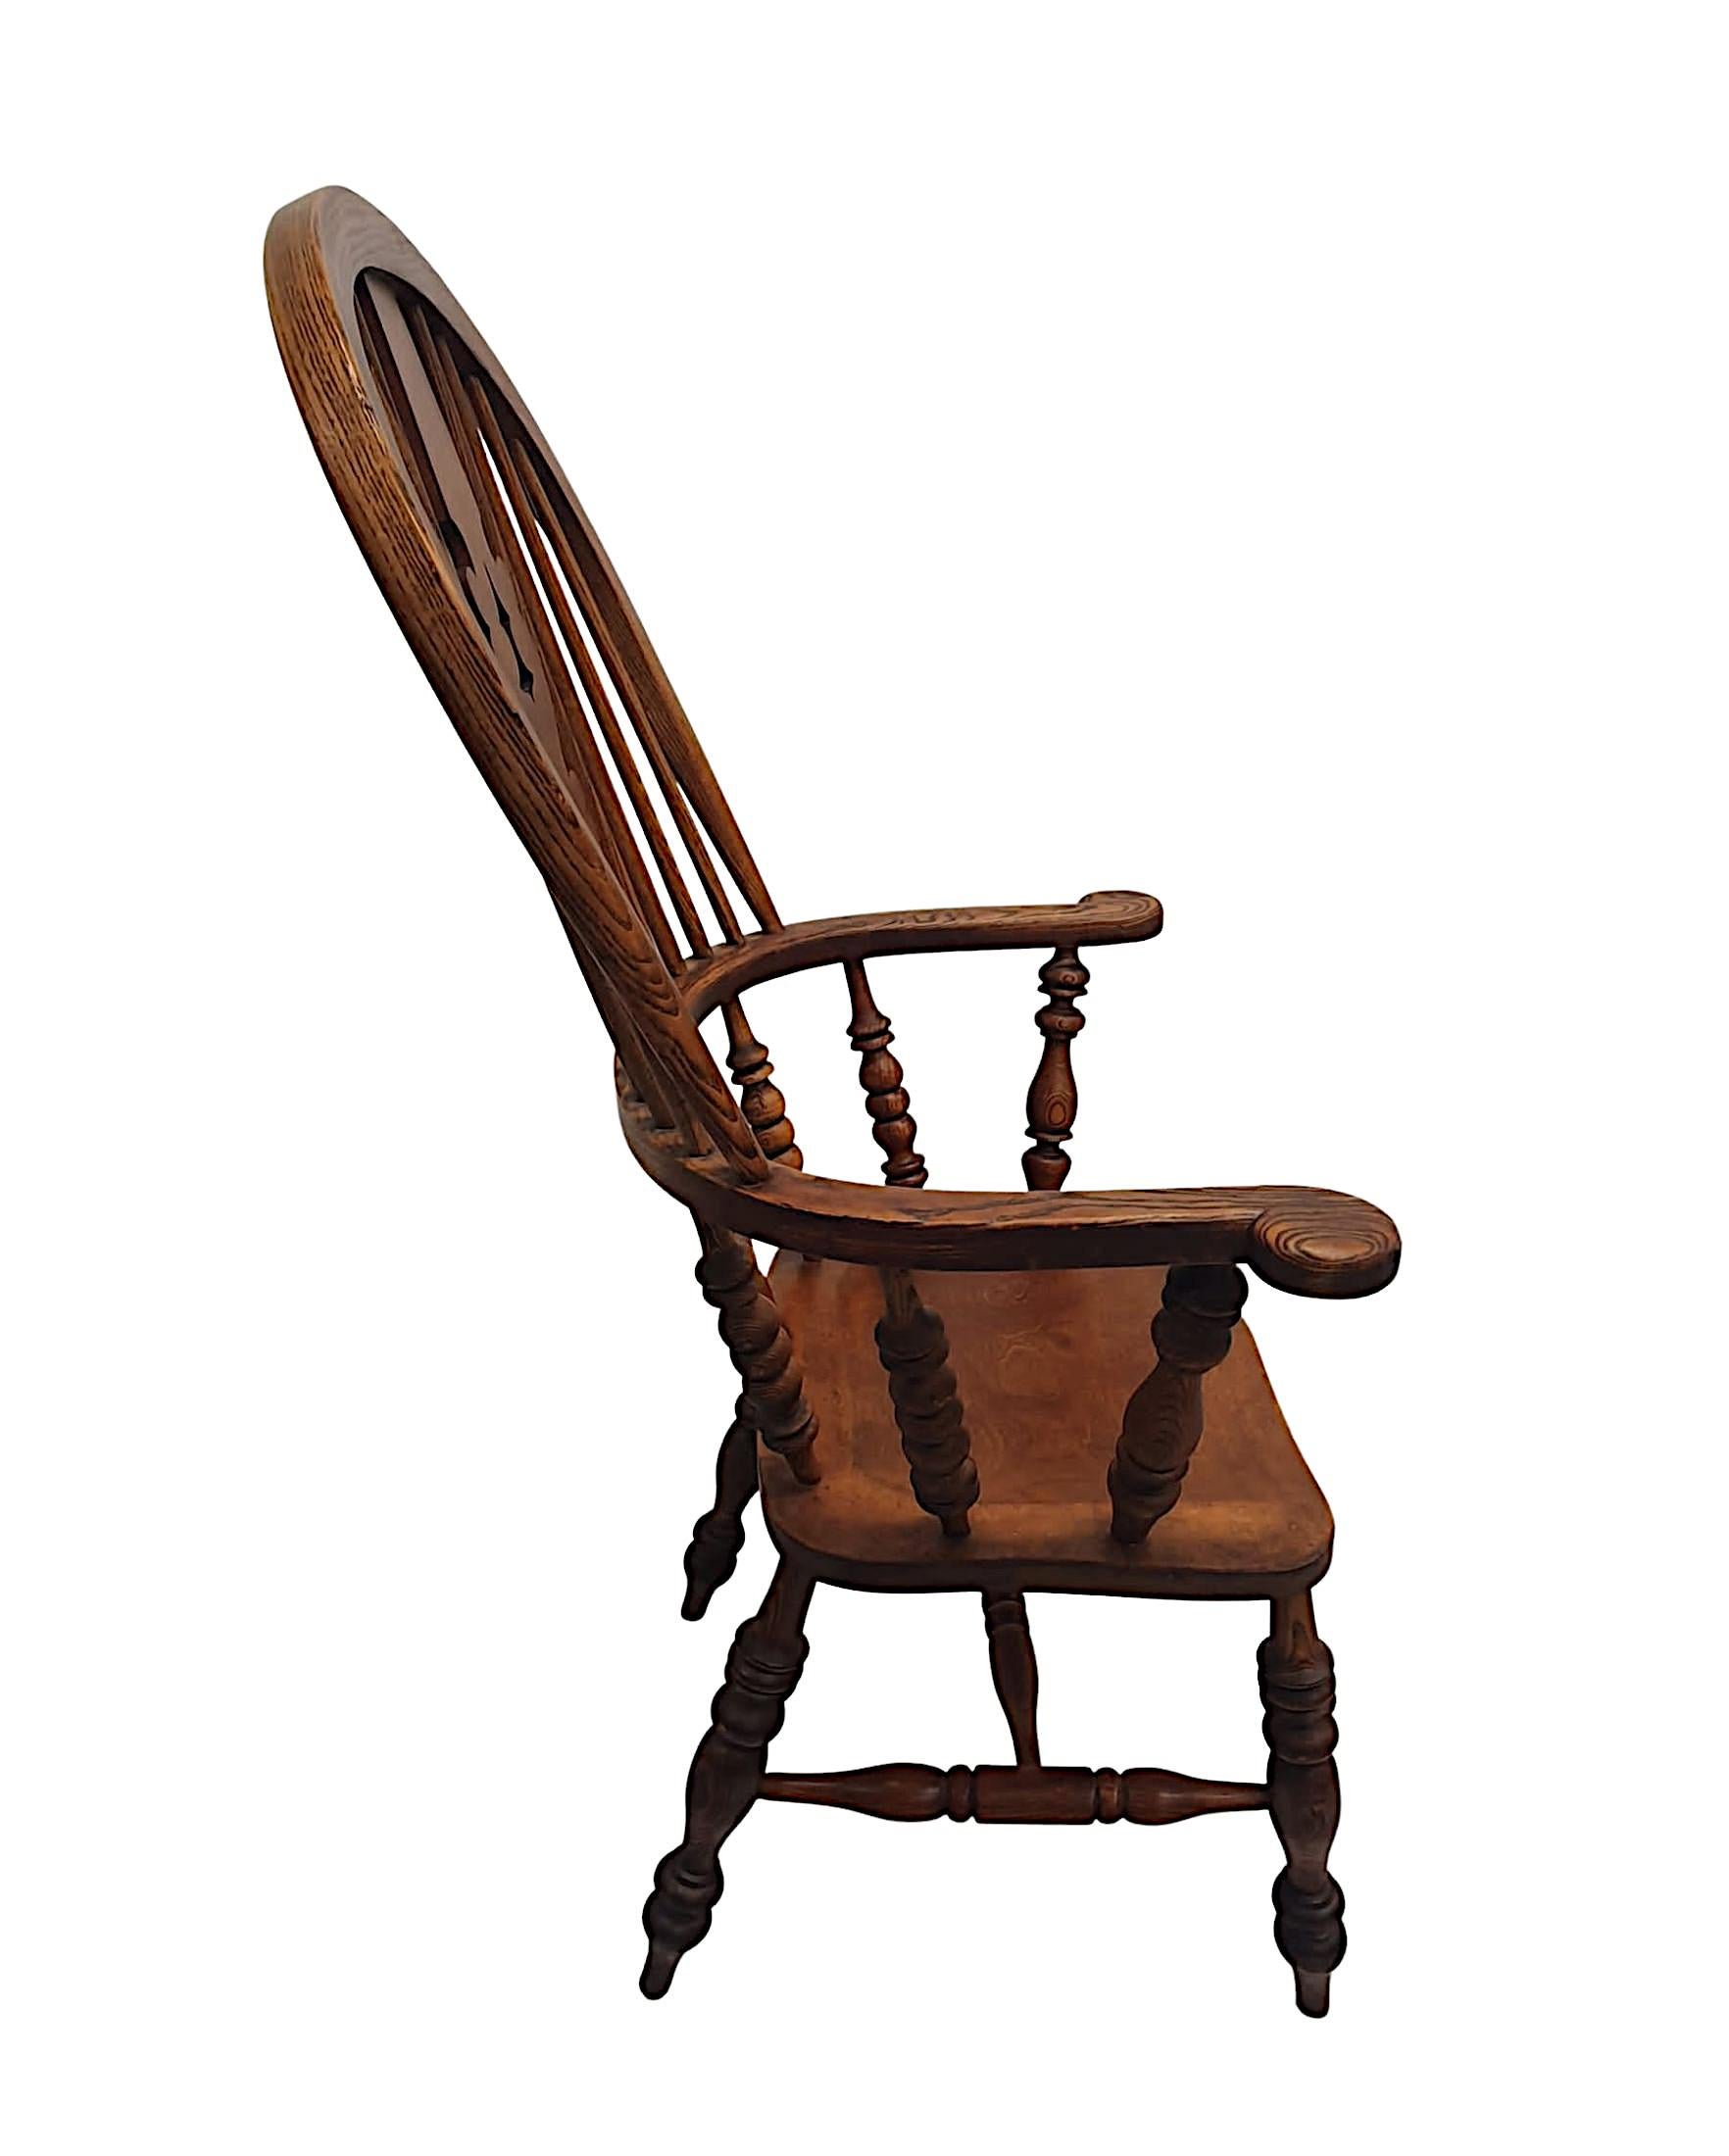 A rare 19th century broad arm ash and elm windsor armchair of exceptional quality, finely hand carved with gorgeously rich patination and grain. The high hoop back with central, shaped fret cut back splat with lovely scroll motif detail flanked with